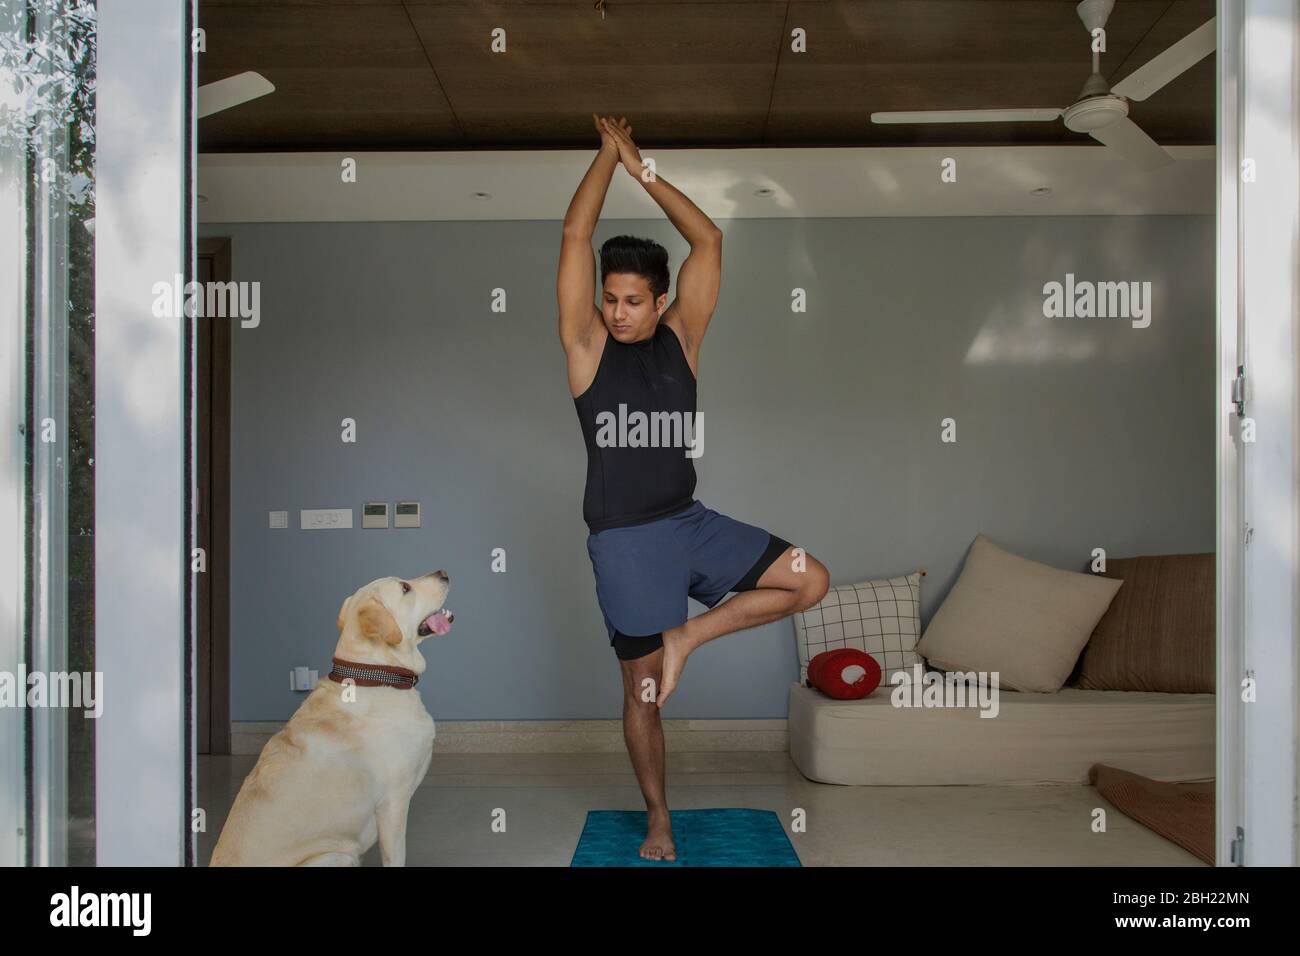 Man standing in tree pose during yoga exercise with his dog sitting calmly next to him. Stock Photo